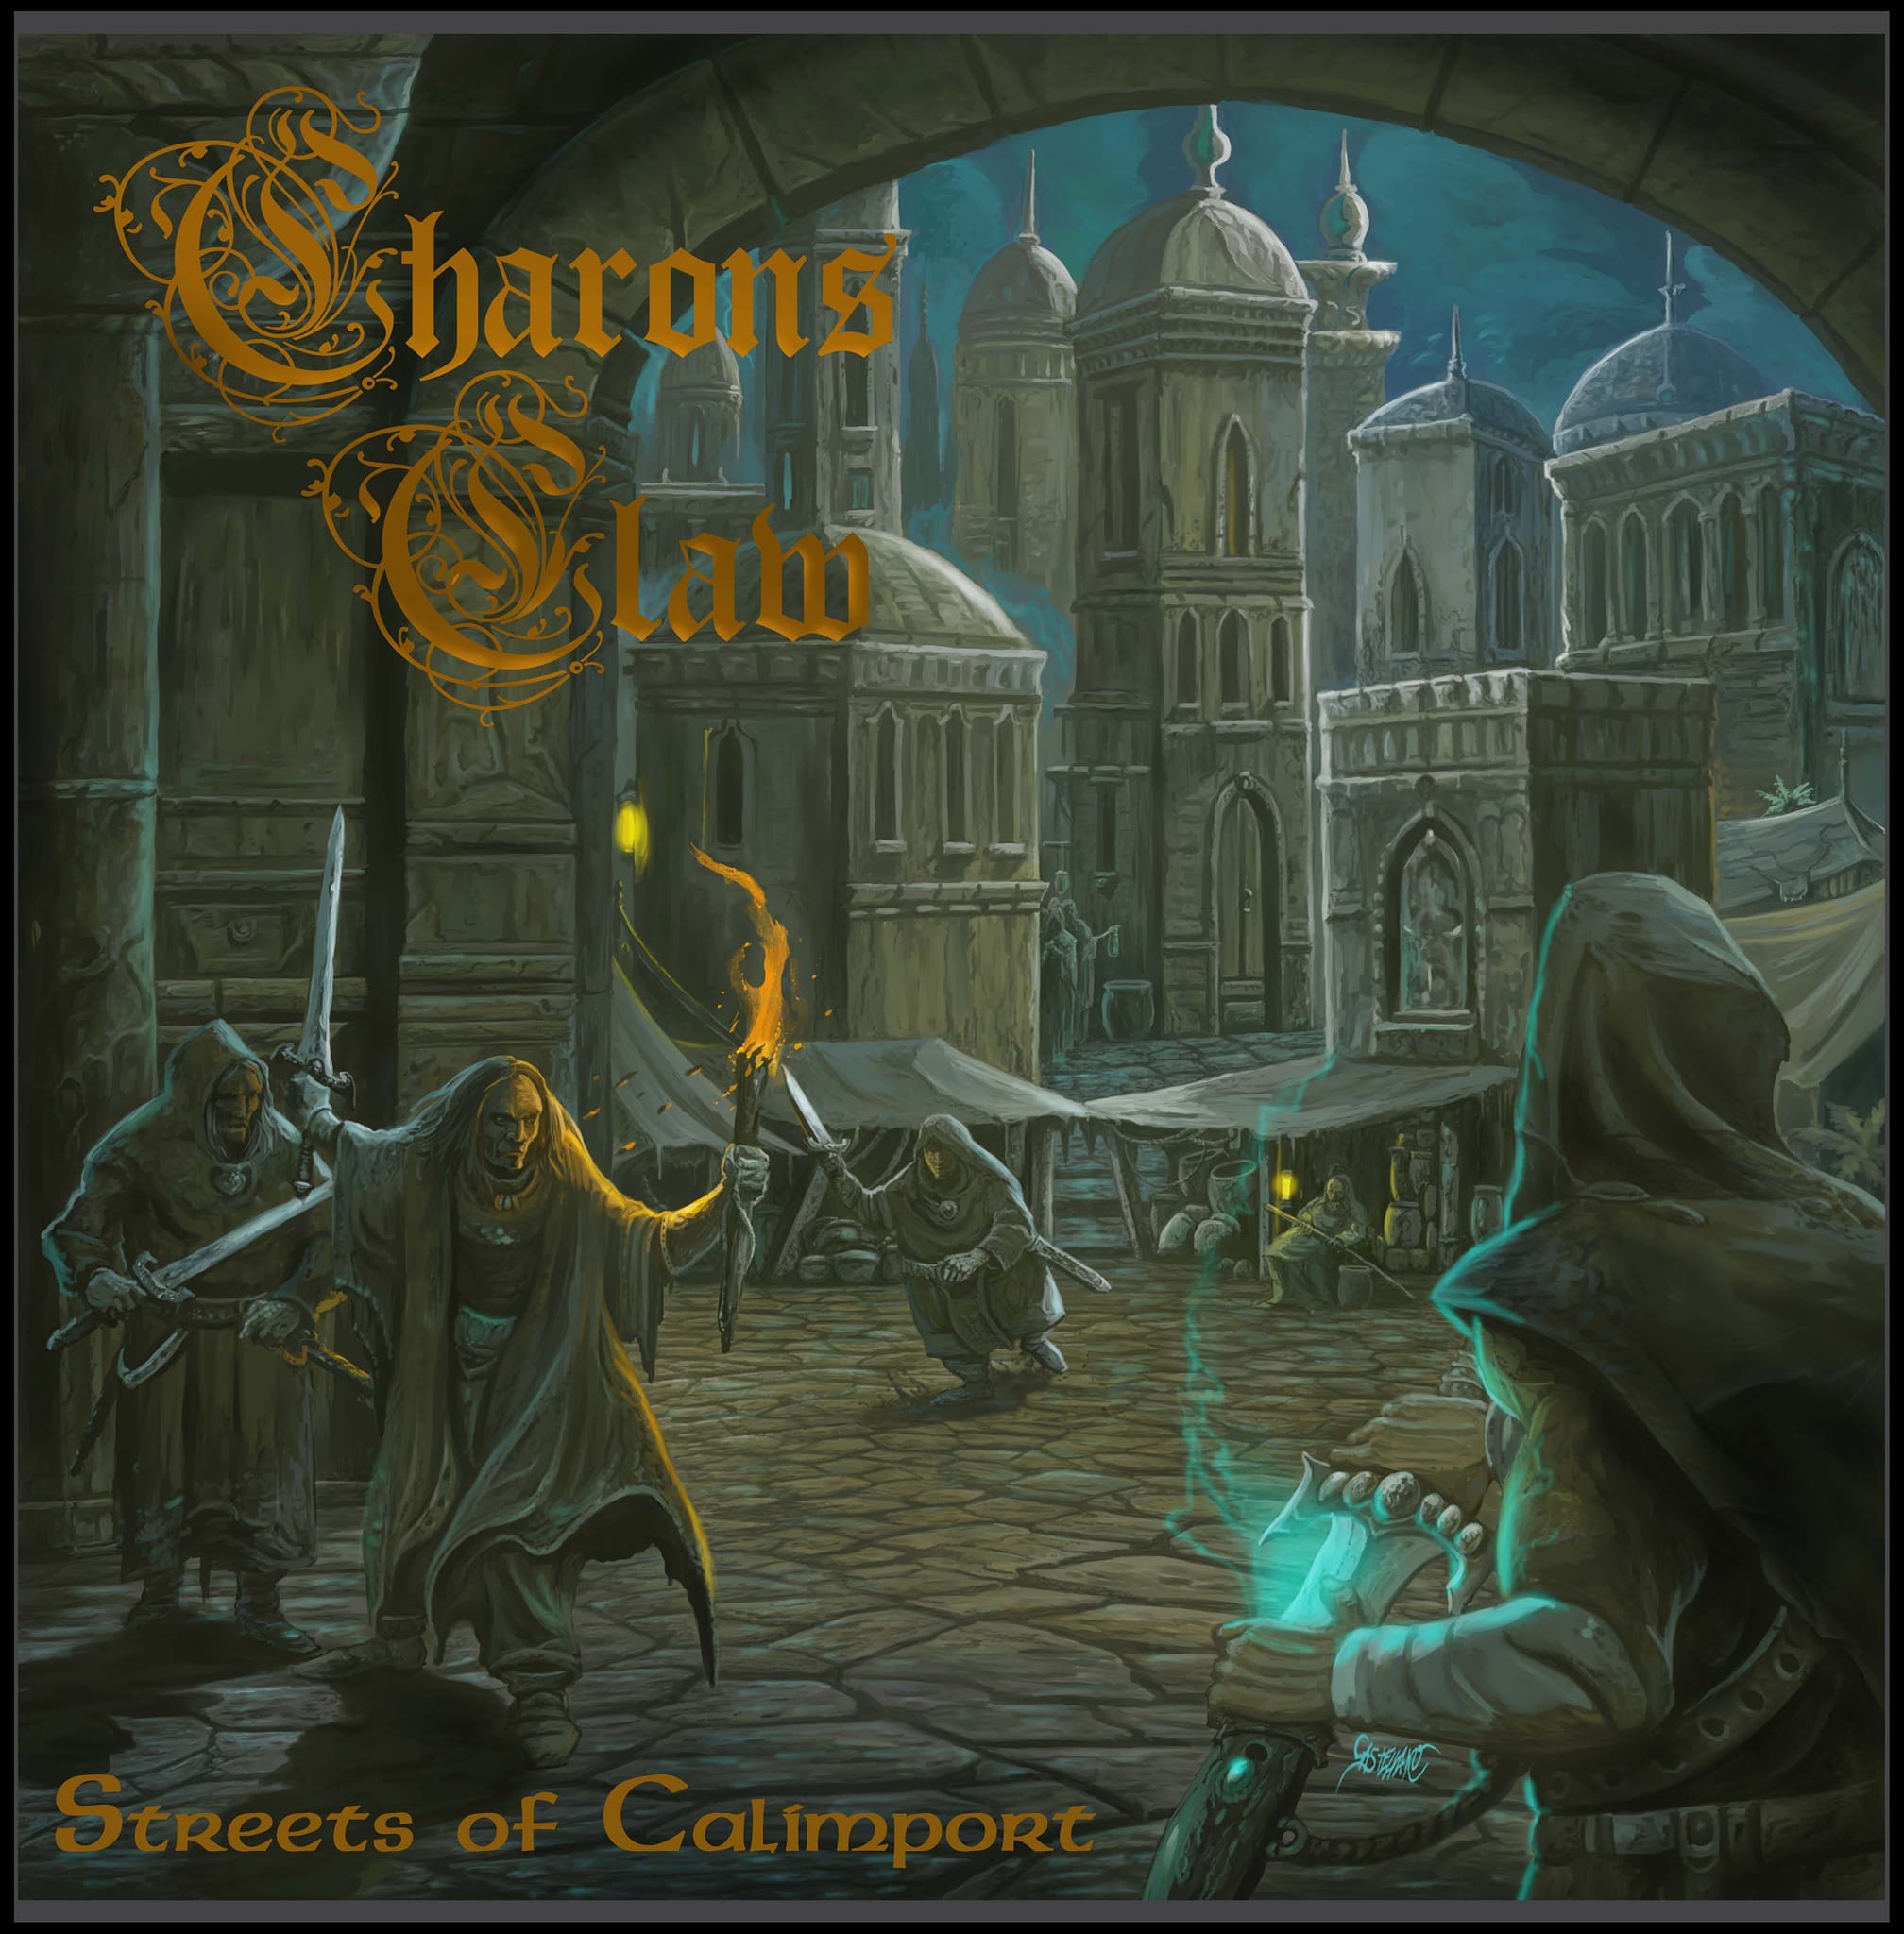 Charons Claw (Heavy Metal)